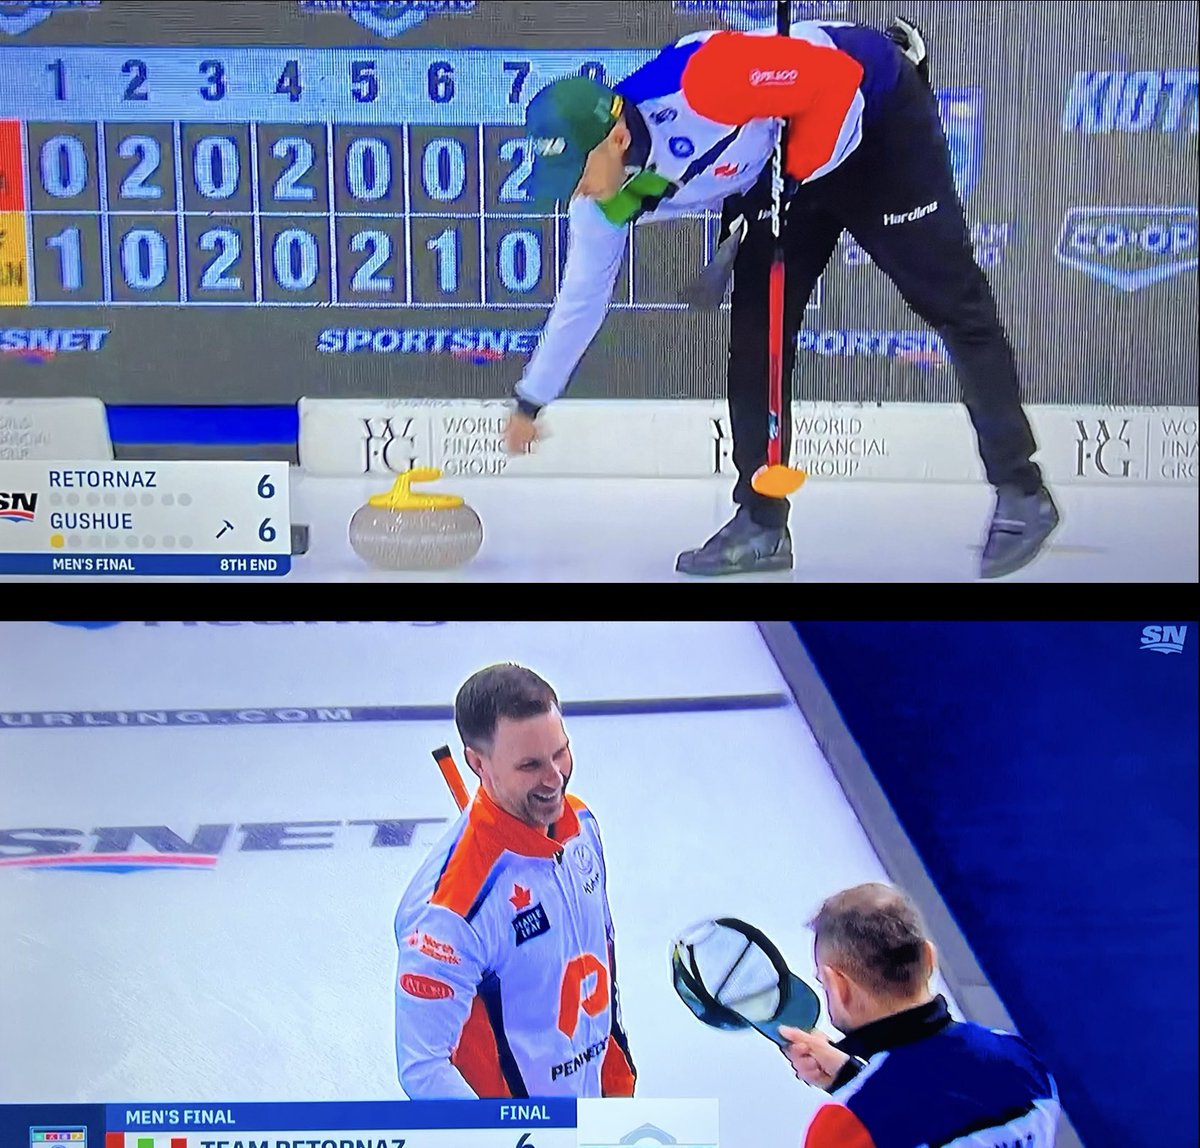 Congratulations Team Retornaz on an incredible season! This might have gotten overlooked in the excitement but these two gestures are a true sign of the amazing team you are! This is why curling is the best sport in the world! Safe travels home. See you guys next year!